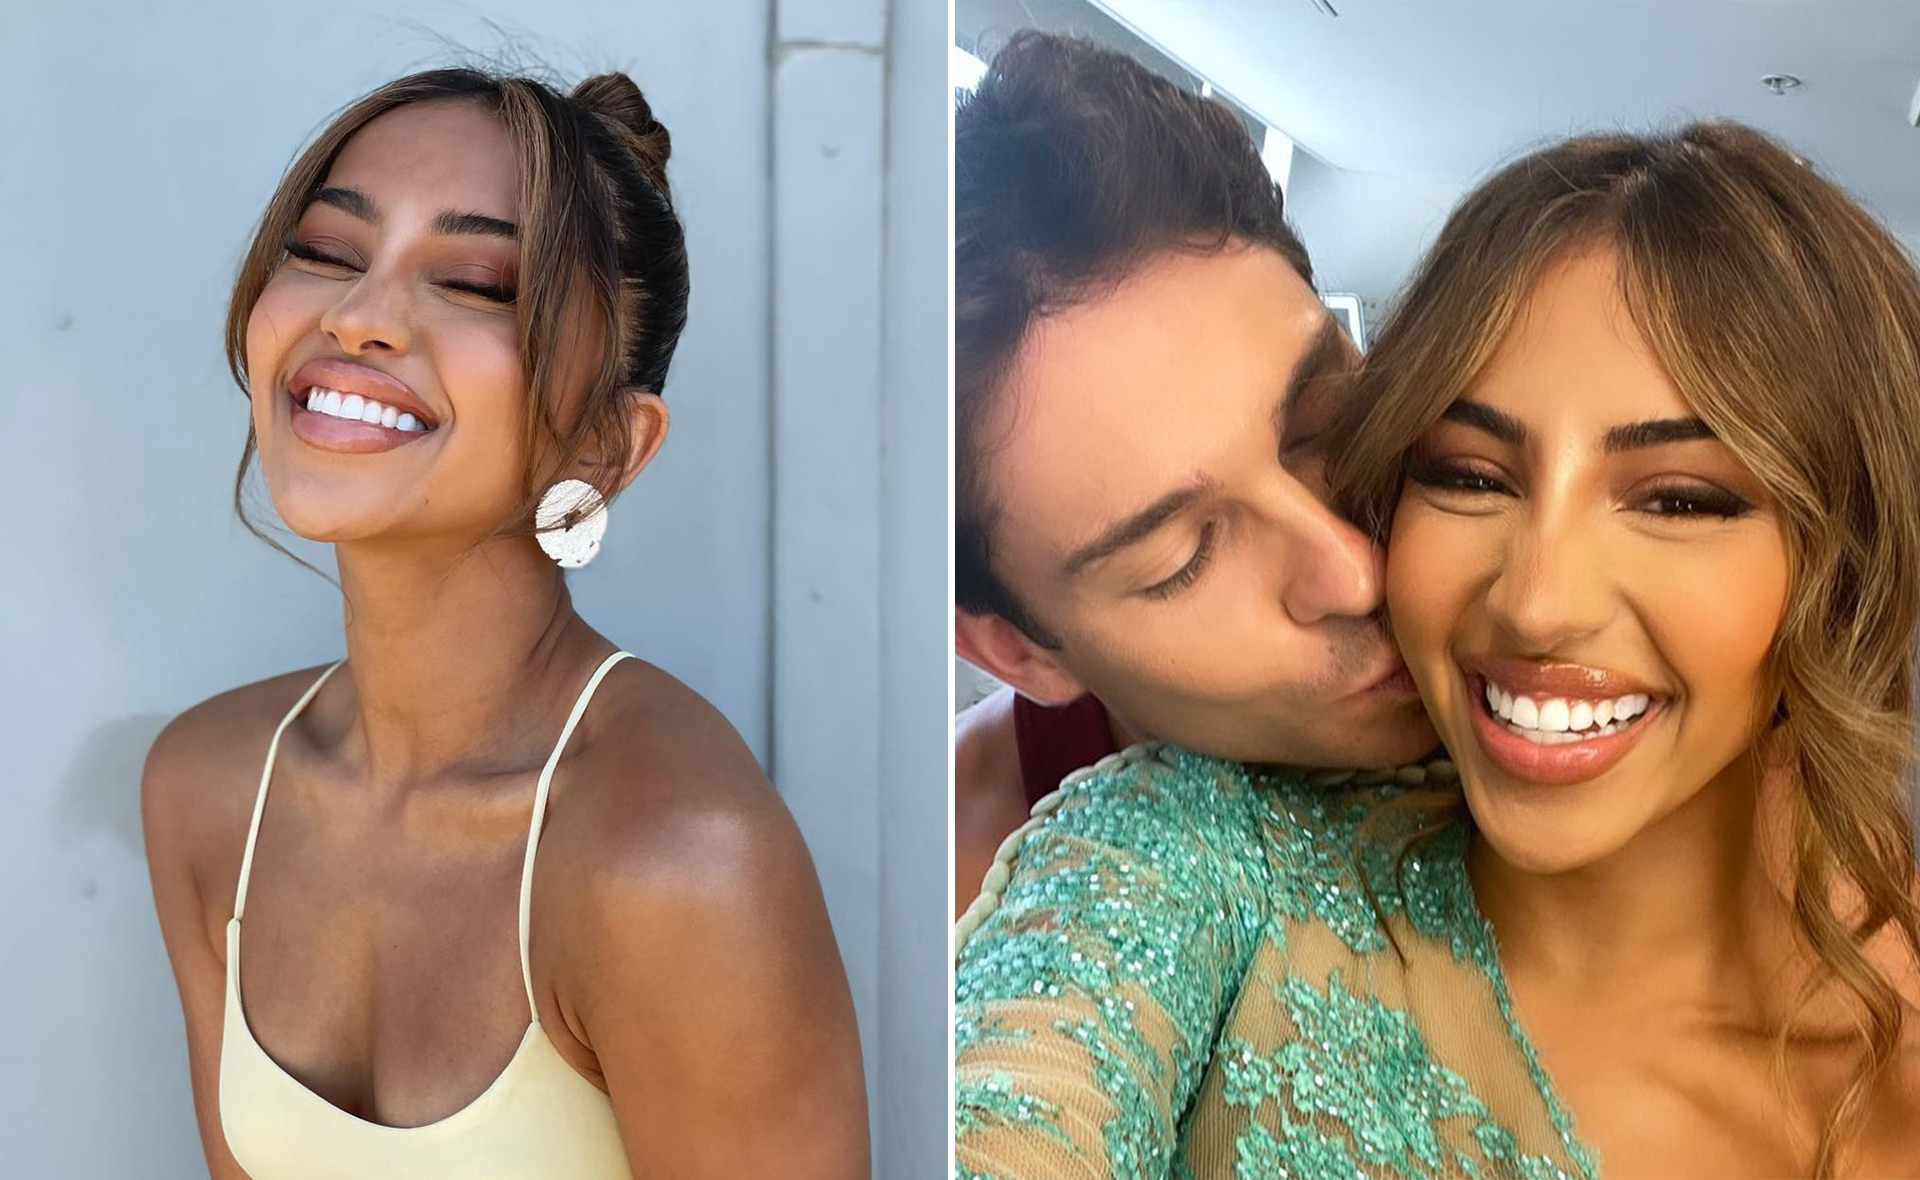 Joey Essex isn’t the only one to catch Maria Thattil’s eye, just look at the I’m A Celebrity… Get Me Out Of Here star’s past loves